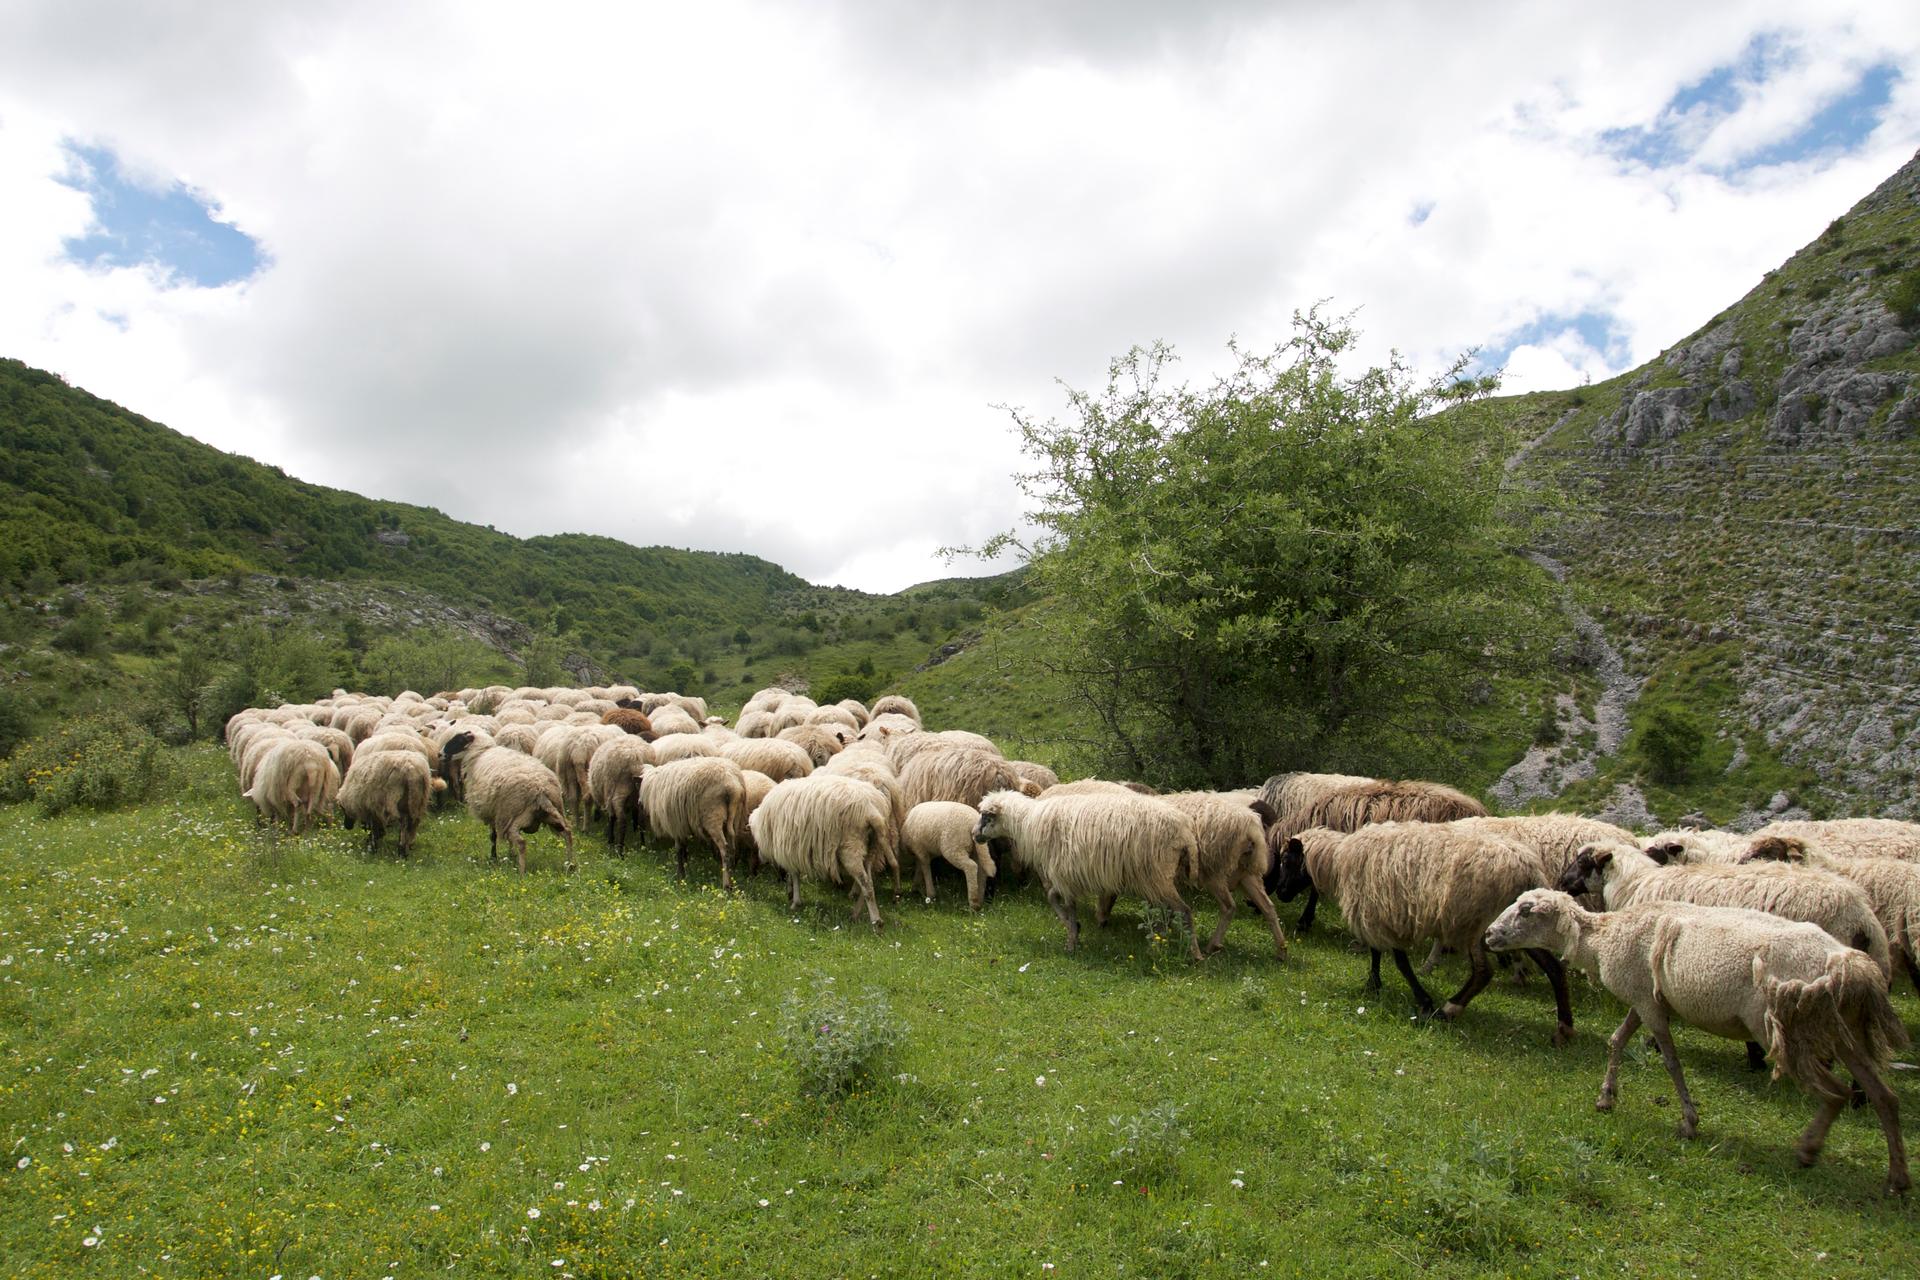 A herd of sheep makes its way through the hills above the village of Lazarat, Albania. Now that they're no longer growing pot in Lazarat, most of the villagers eke out a living herding sheep.